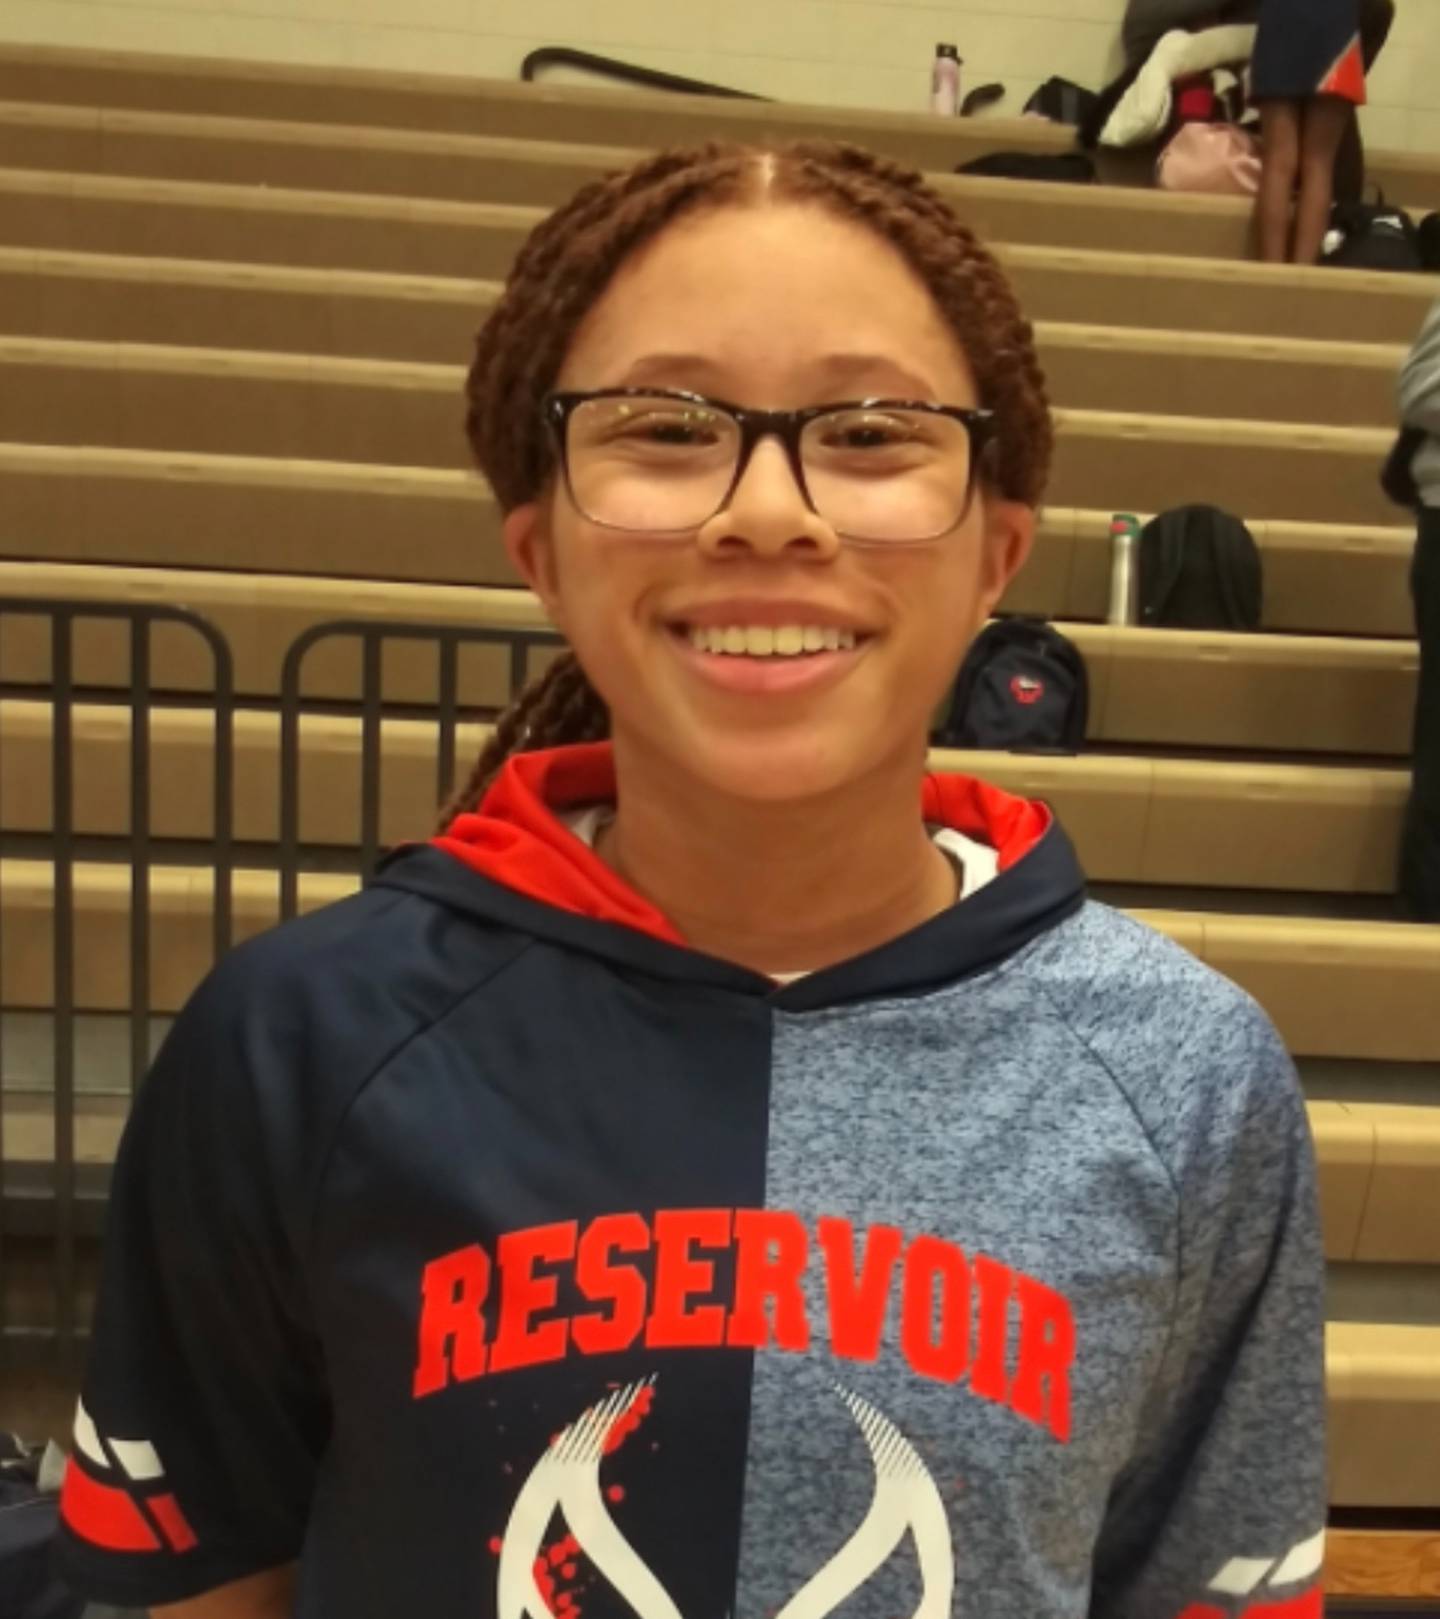 Alissa Young was the spark behind Reservoir's comeback win against Arundel in the opening round of the Class 4A East Region I playoffs Friday. The sophomore capped with a 14-0 surge with the go-ahead basket and a 3-pointer as the Gators eliminated the Wildcats in Fulton.